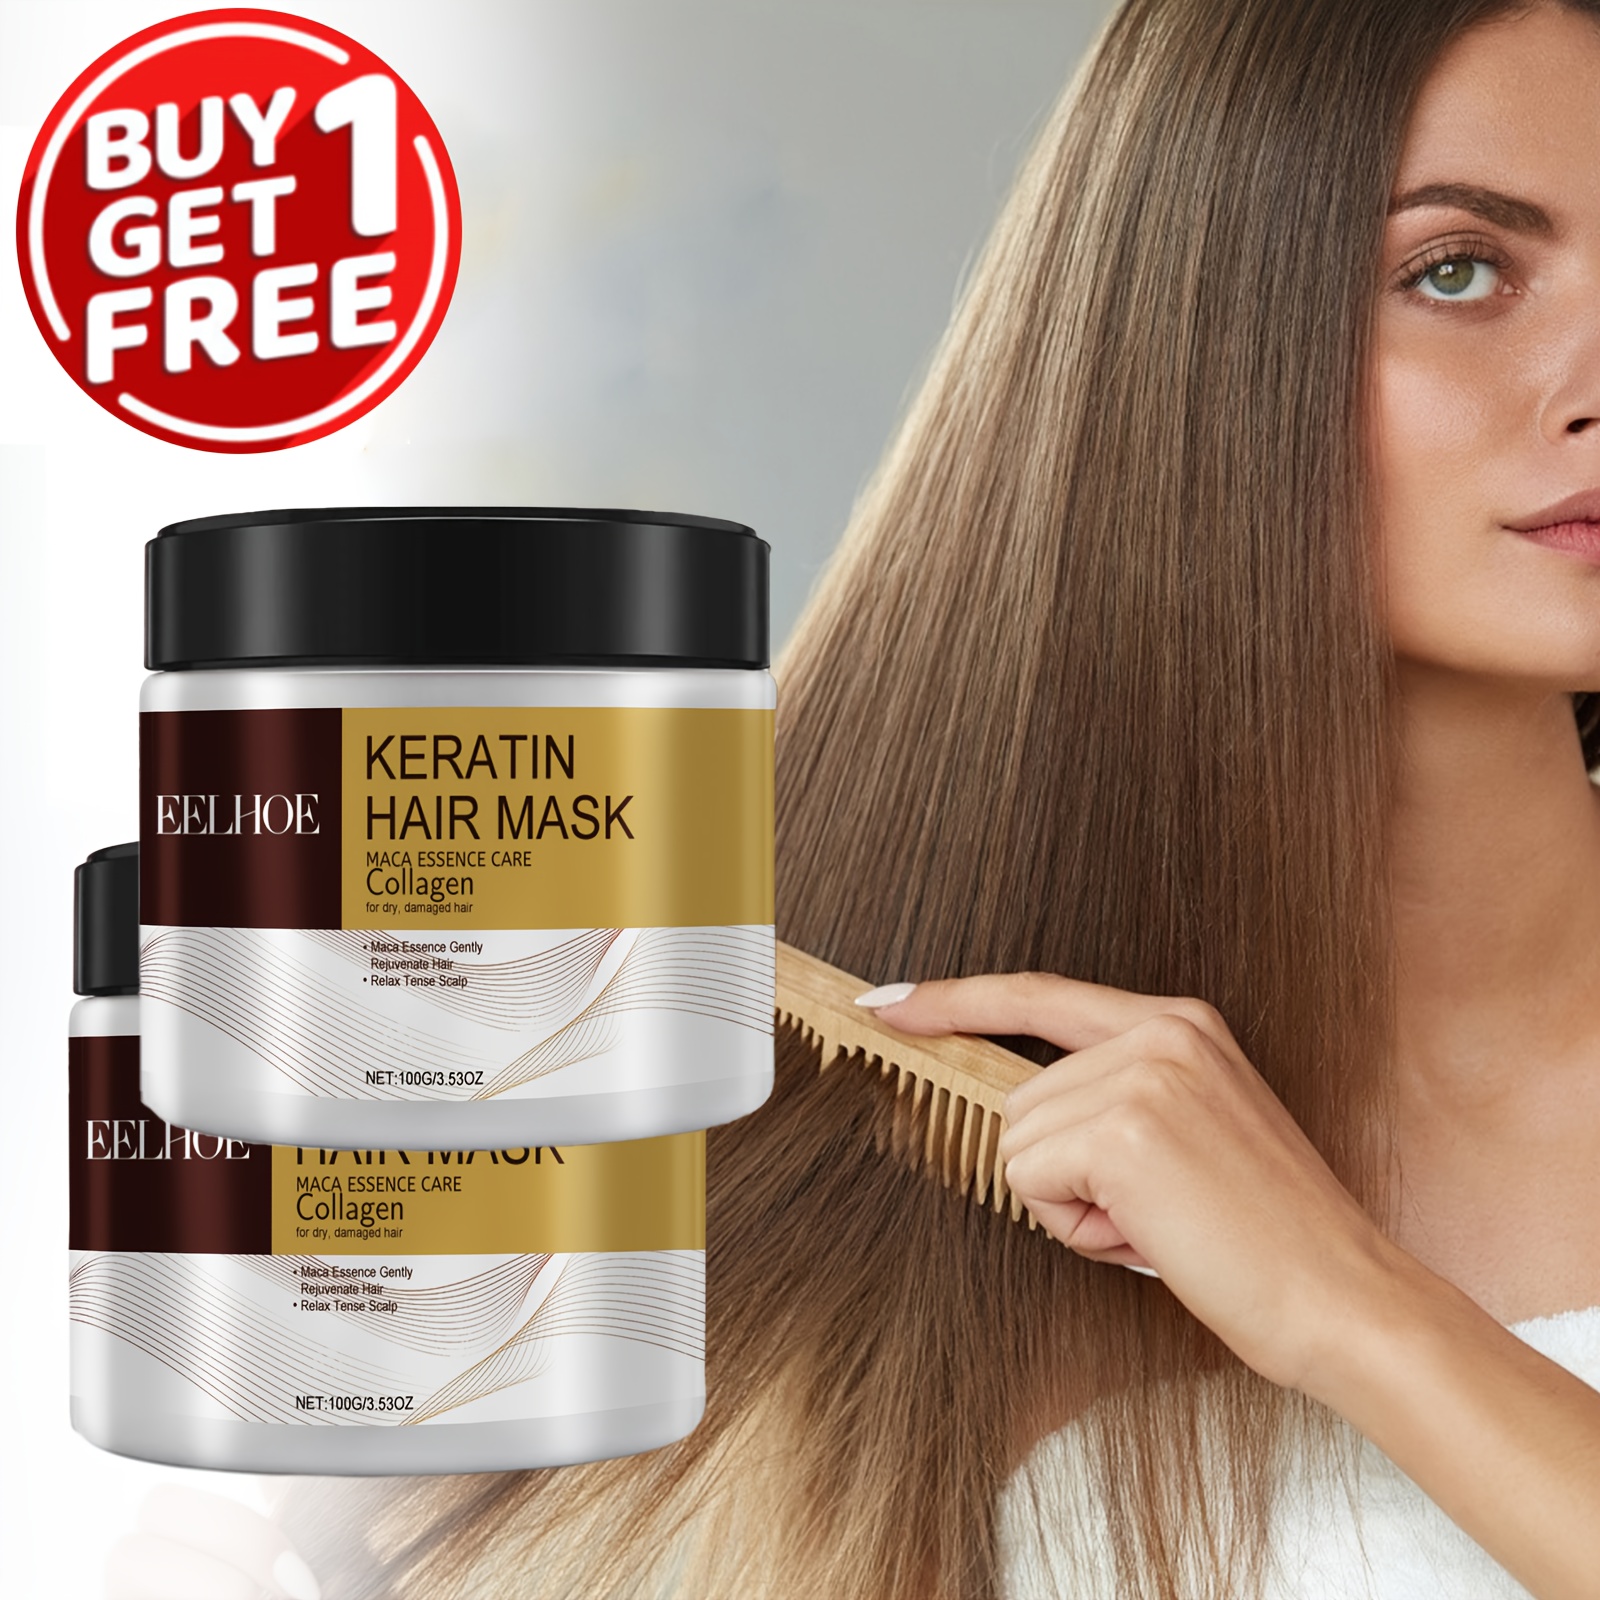 

2pcs/set Soft Moisturizing Hair Mask, Keratin, Collagen, Coconut Oil Ingredients - Deep Moisturizing Hair, Suitable For All Types Of Hair